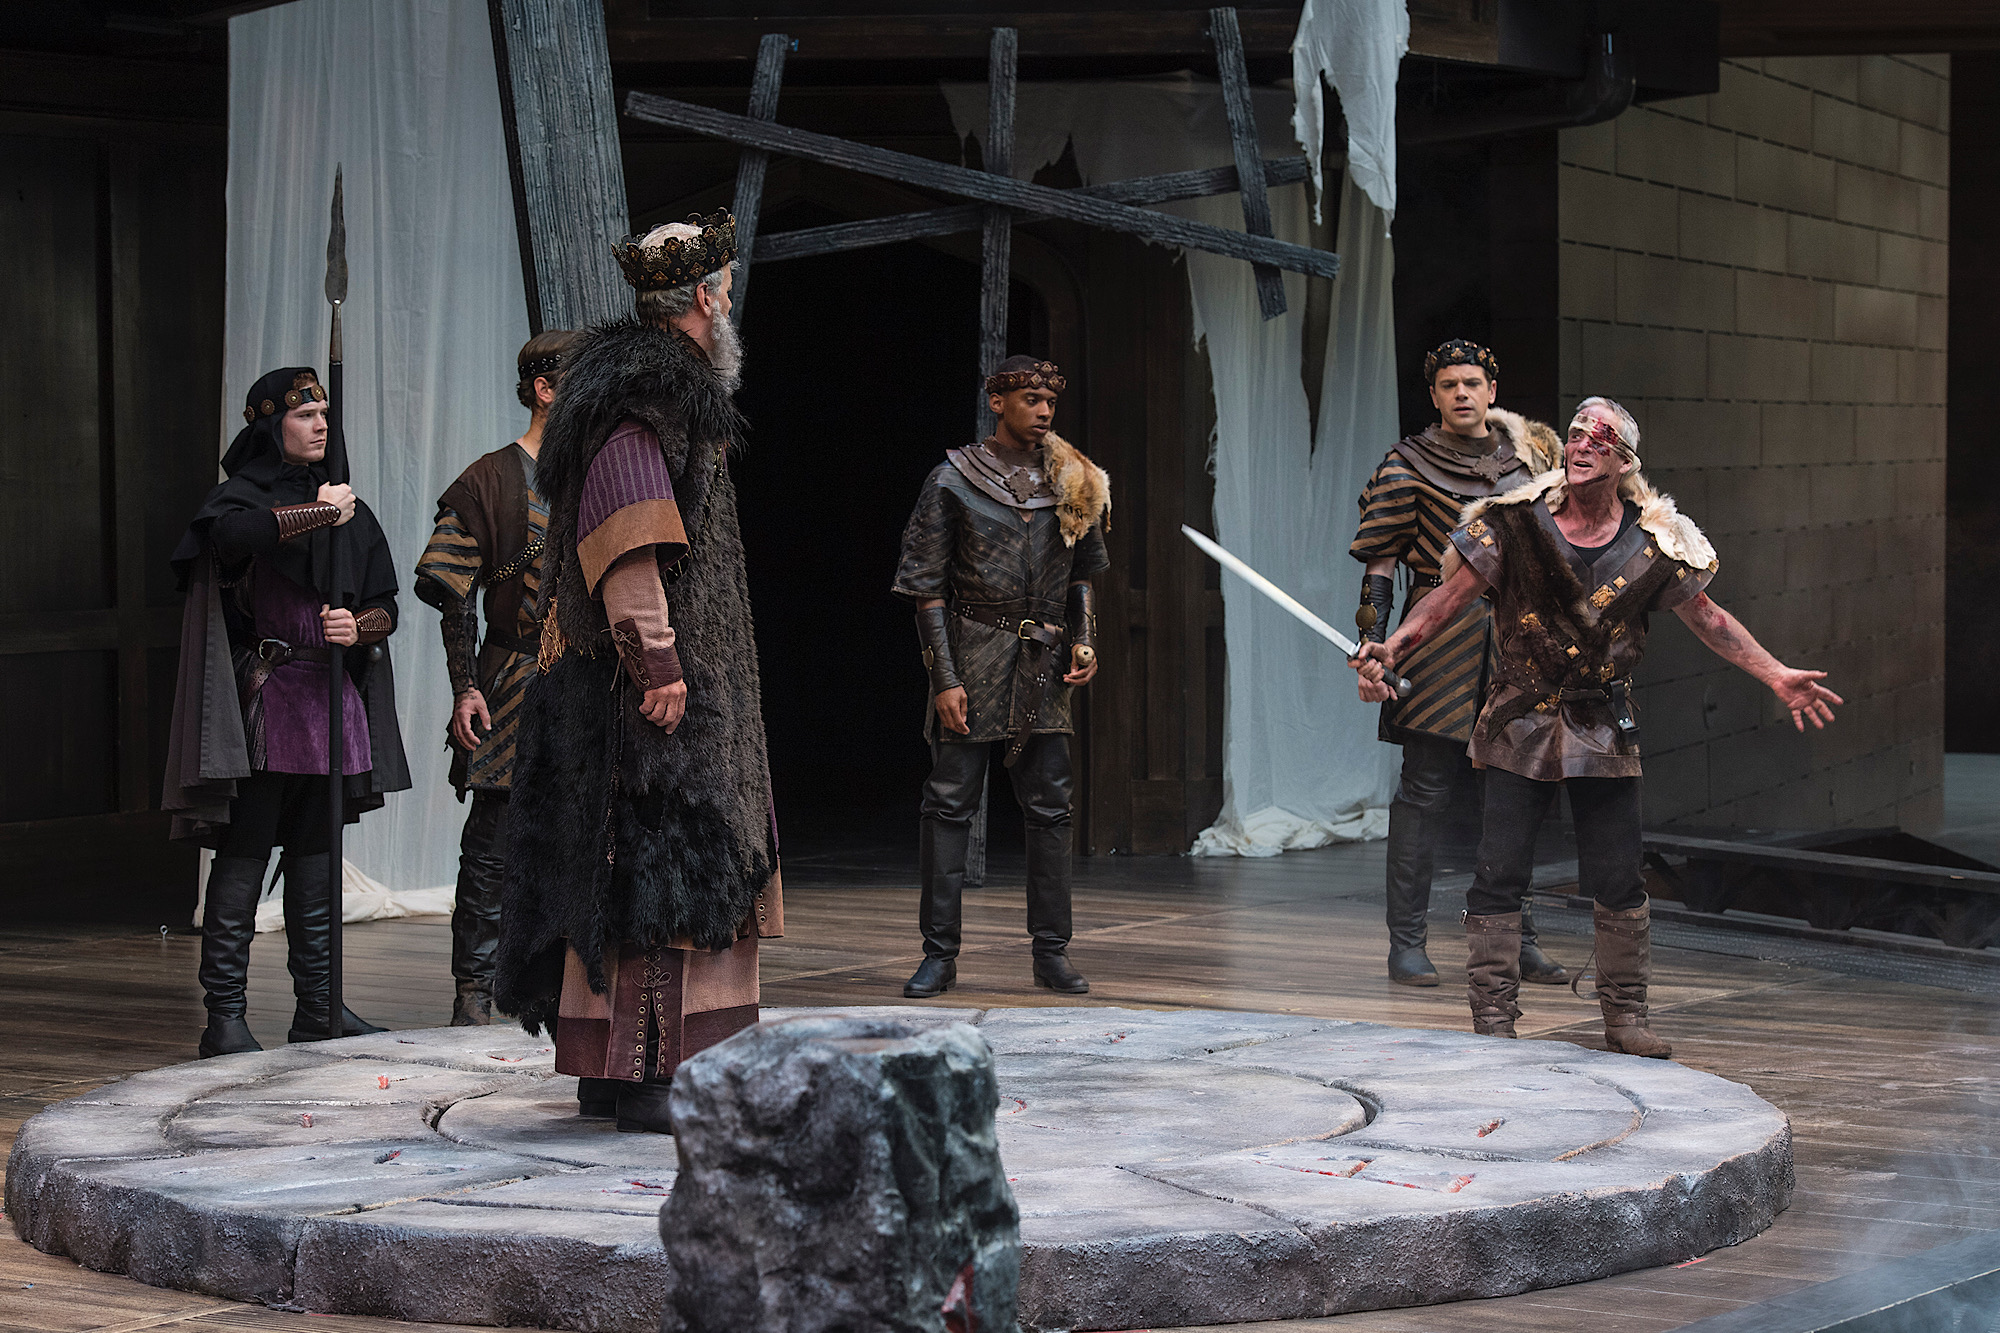 Utah Shakespeare Festival offers Cyber Monday ticket discounts ahead of